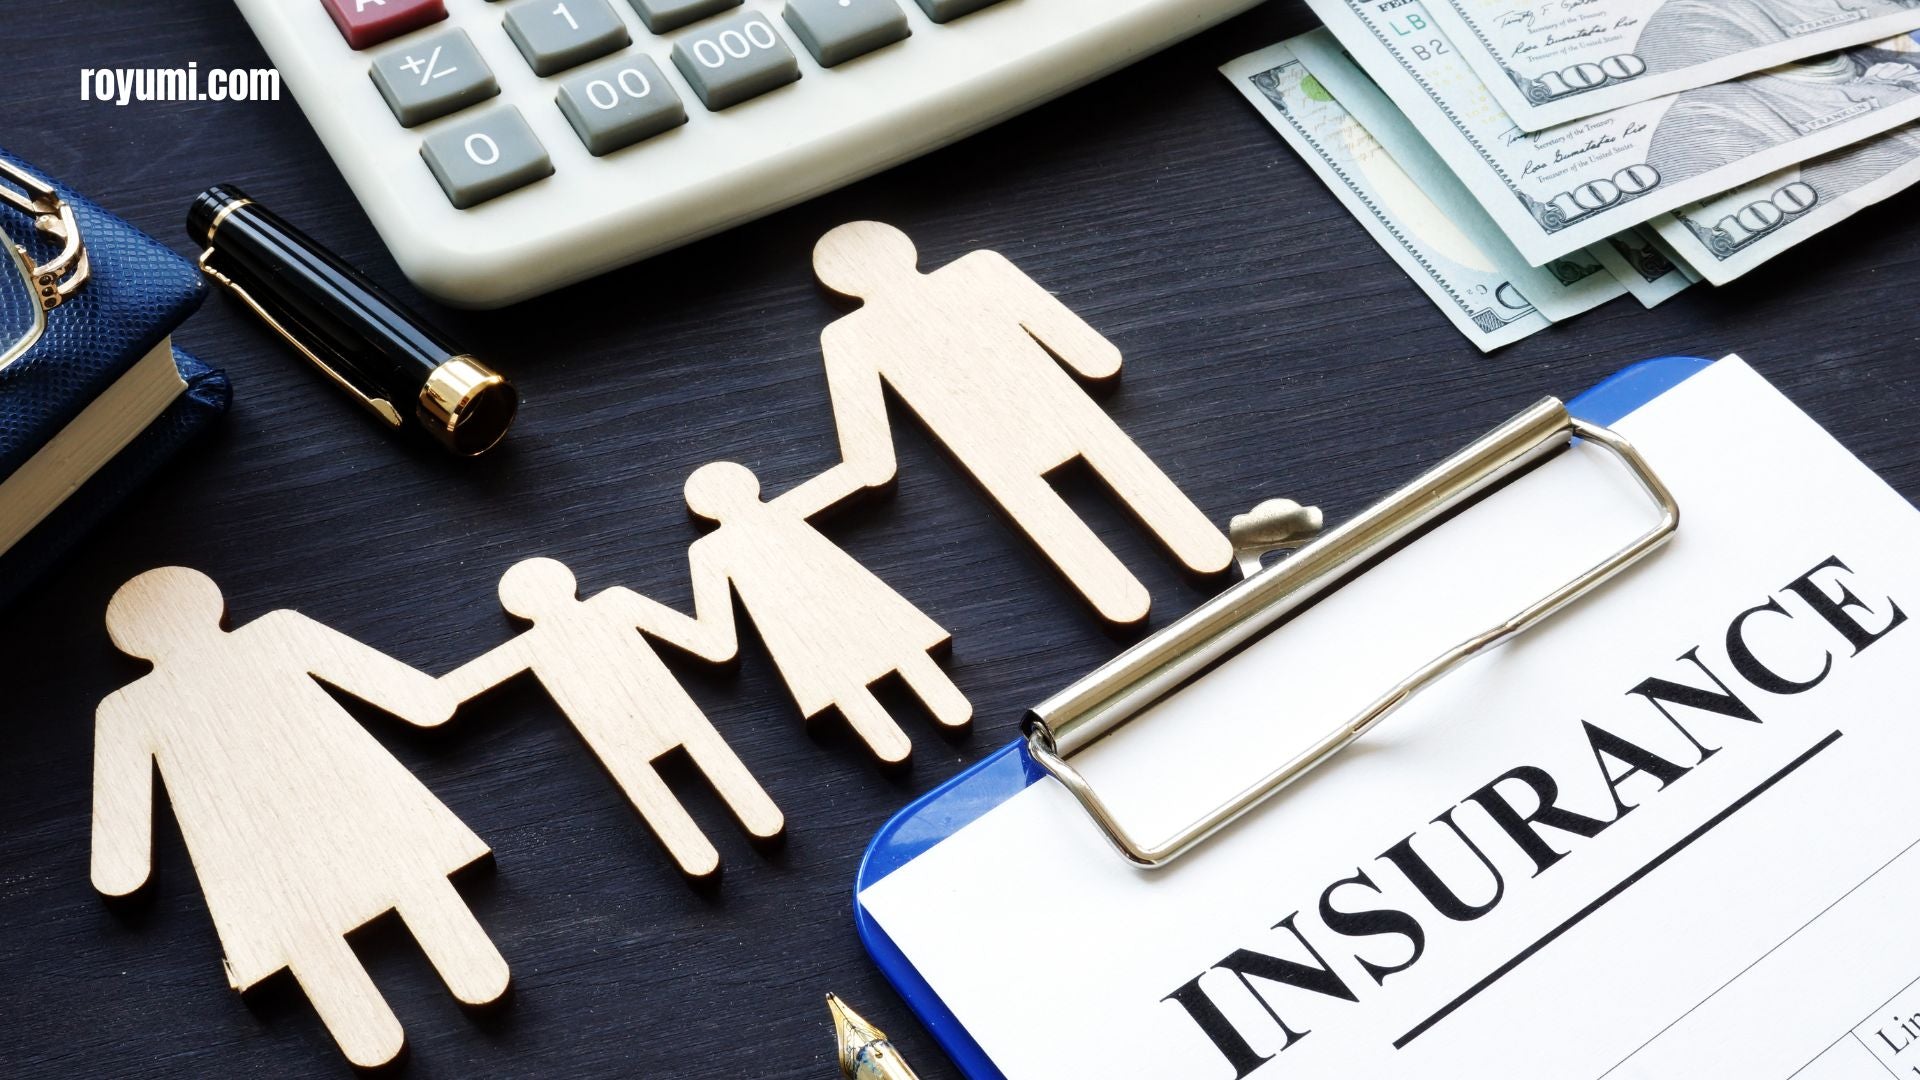 6 Things to Consider When Looking for Life Insurance as a Foreigner in Japan